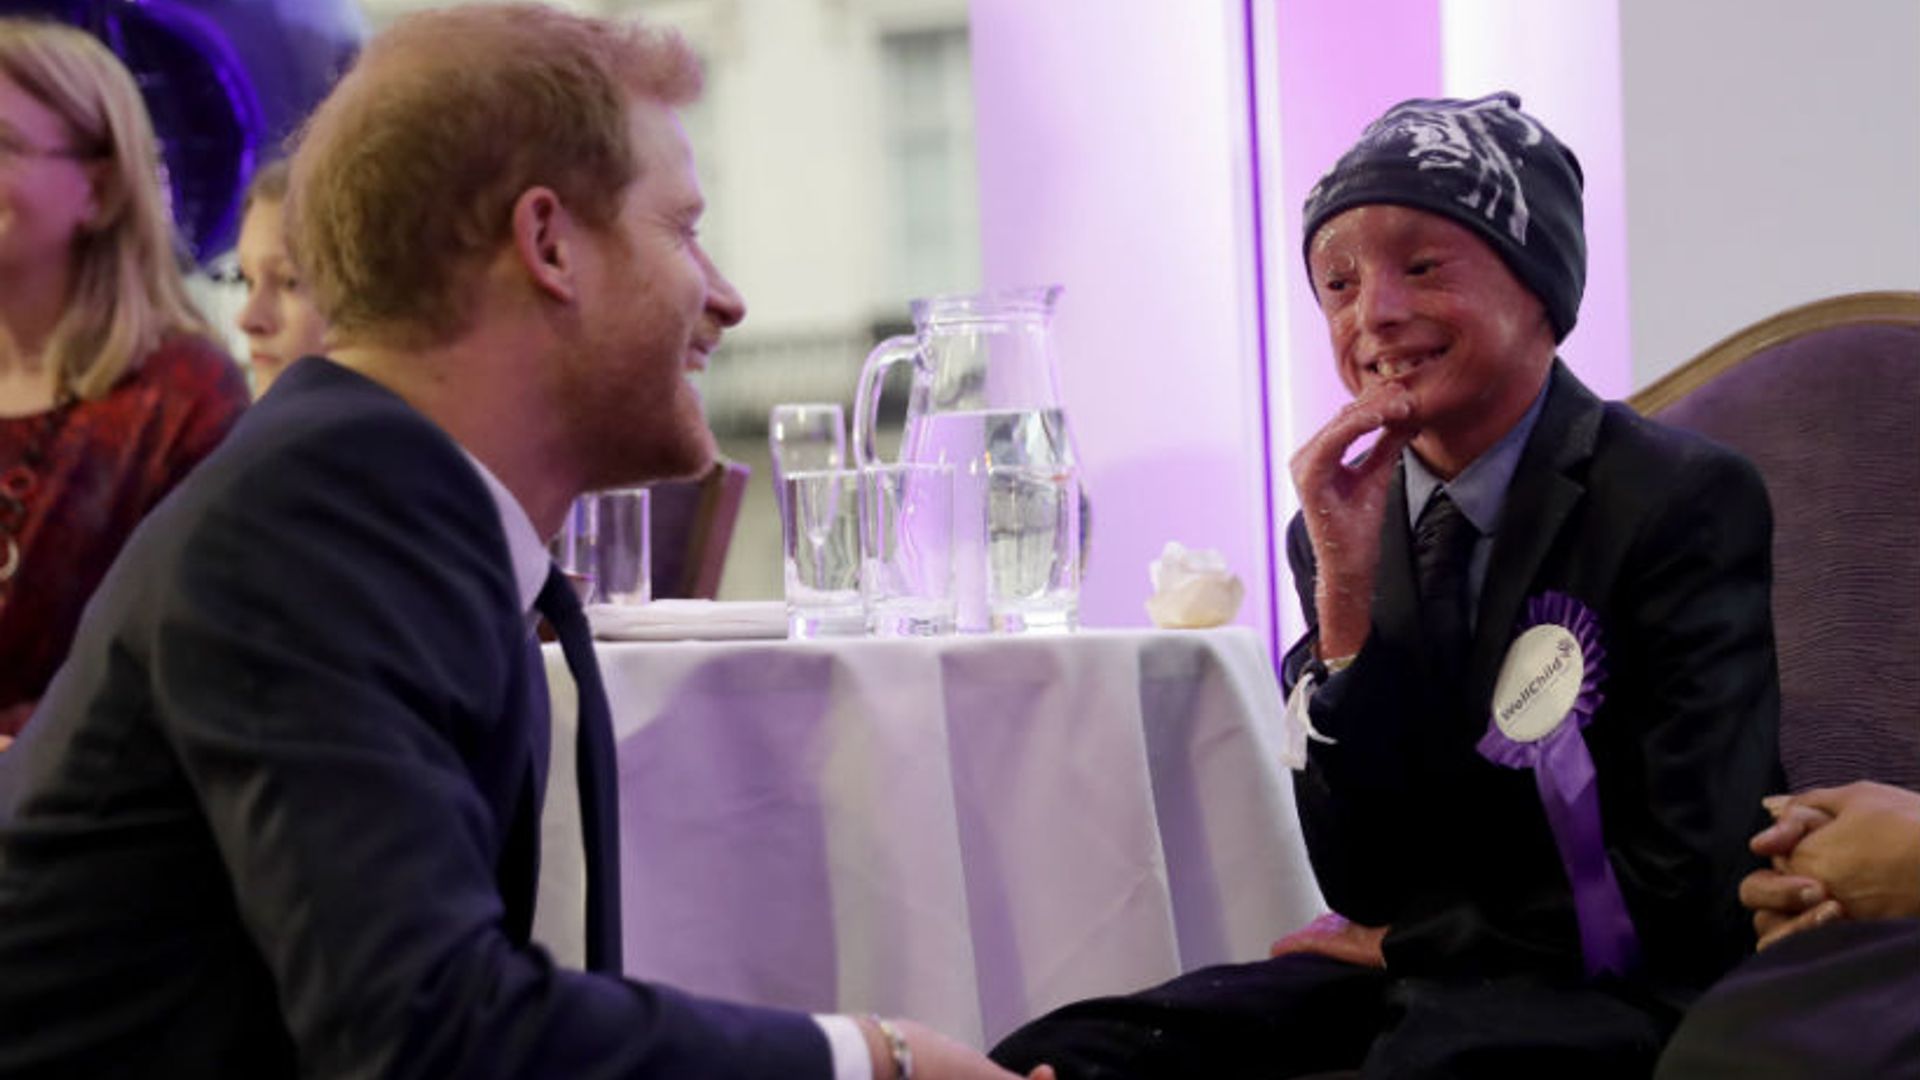 'Really lovely' Prince Harry bonds with seriously ill children at WellChild Awards